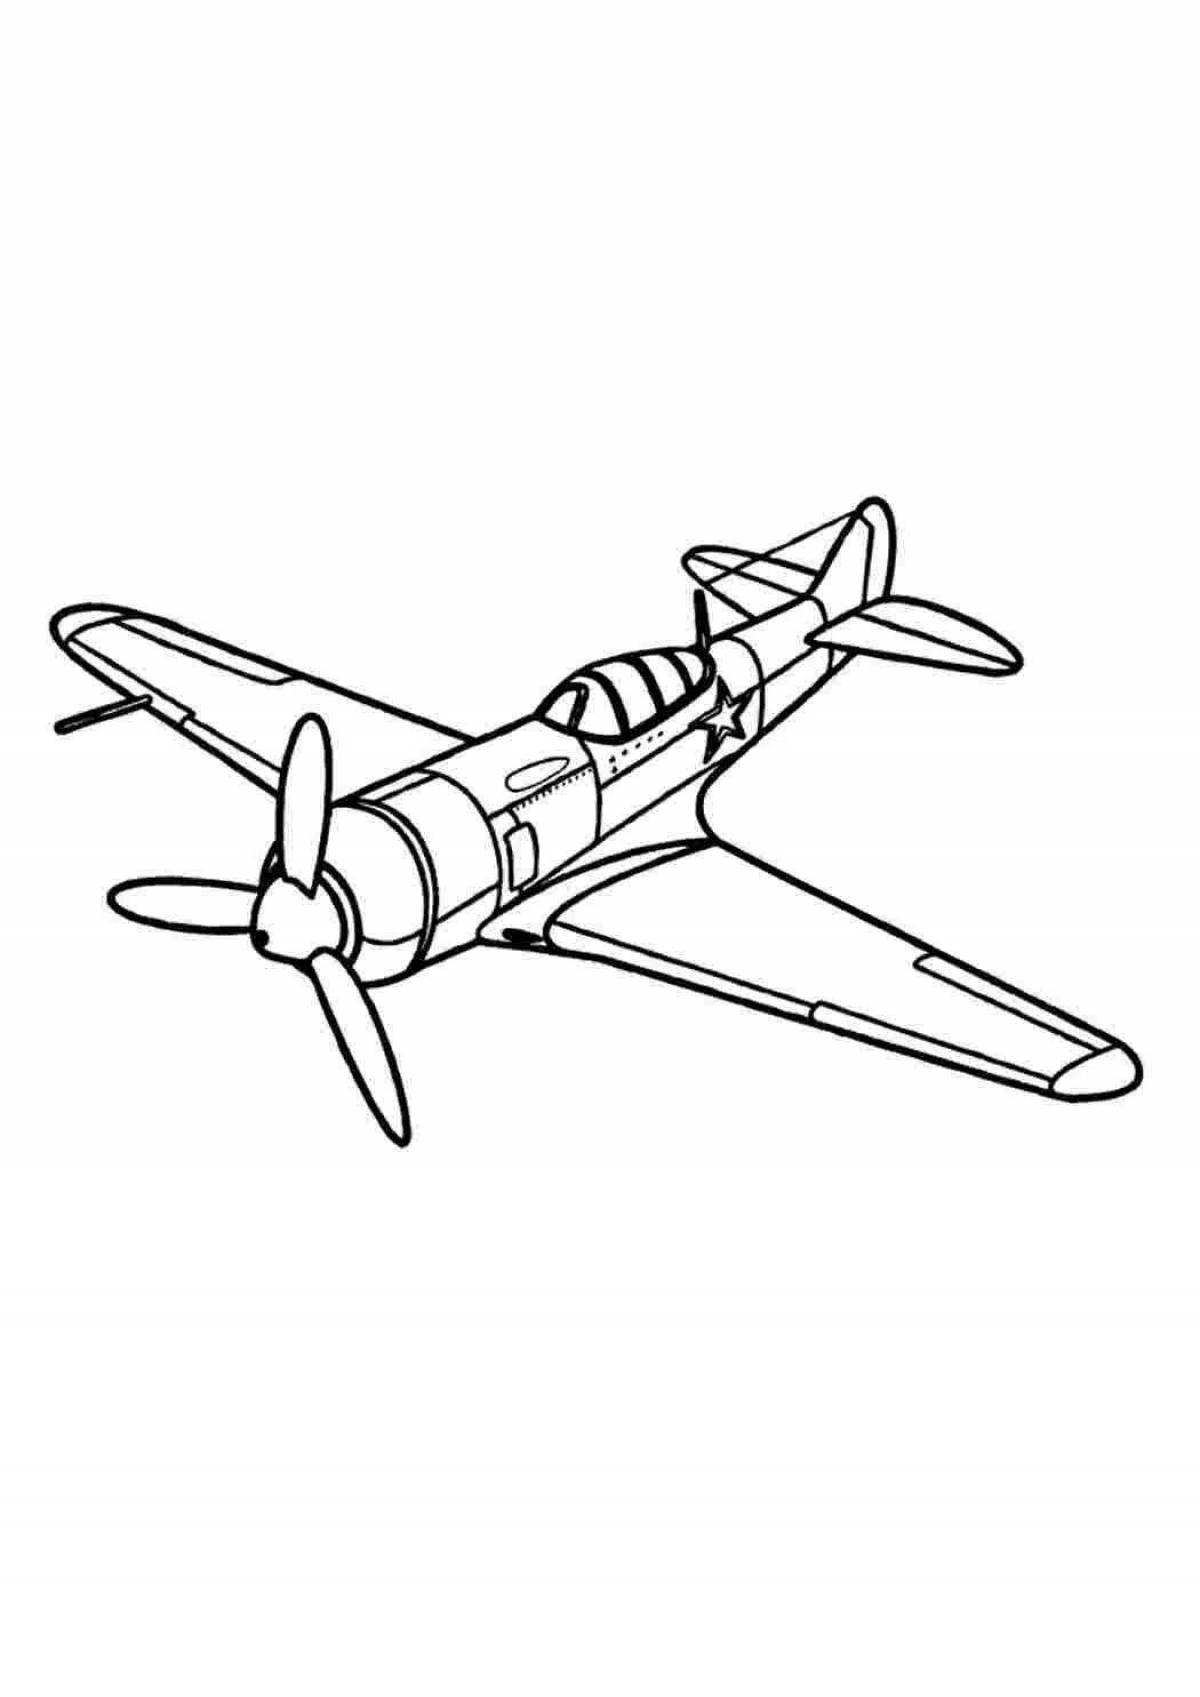 Greatly detailed silt 2 aircraft coloring page